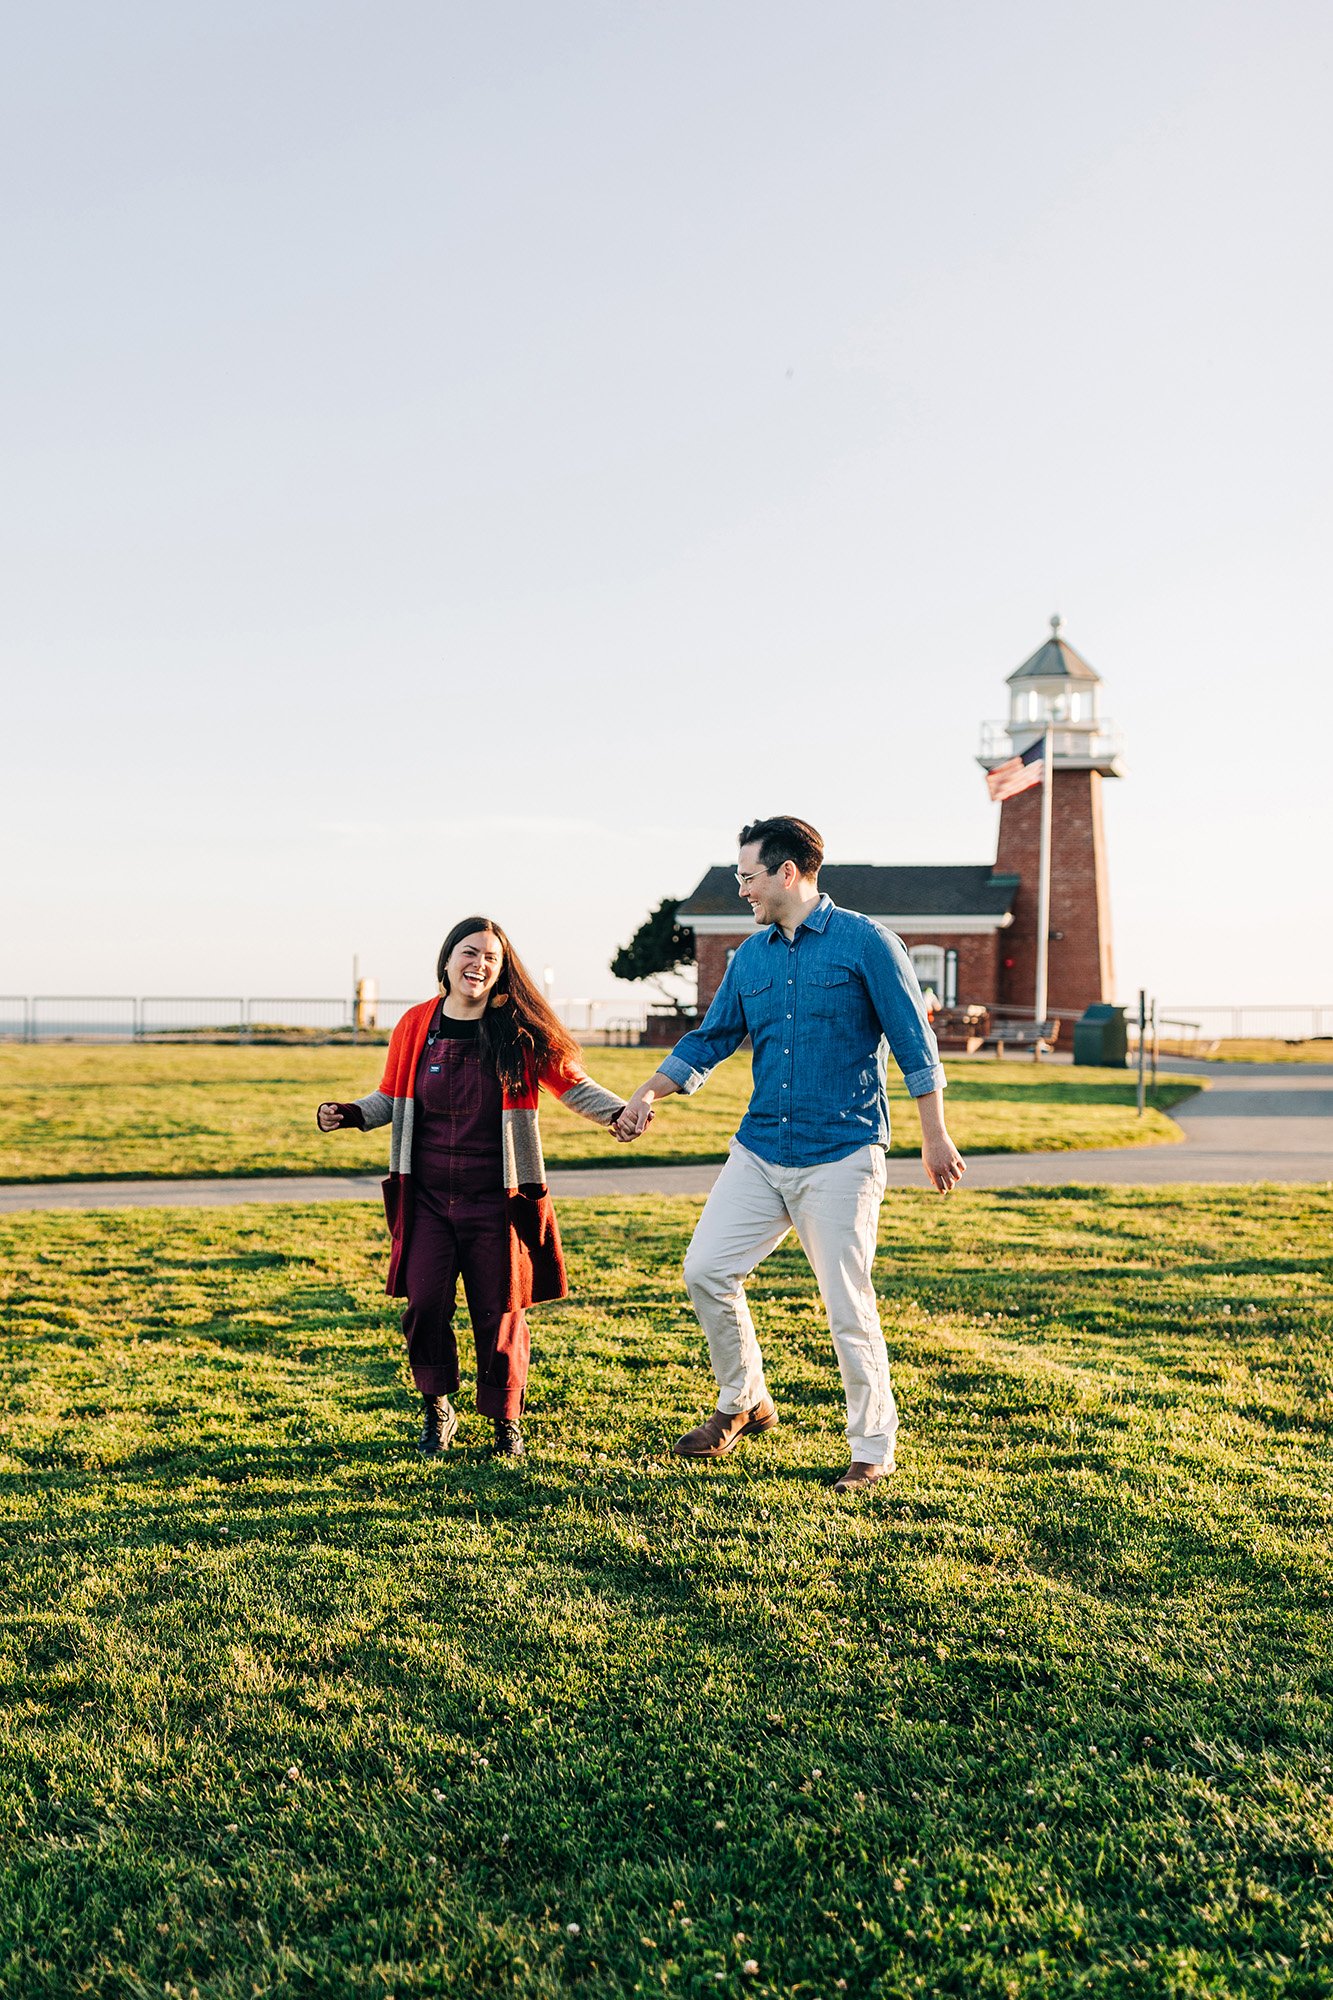 Chloe and Adam walk together on the greenery in front of a lighthouse in Santa Cruz, California.